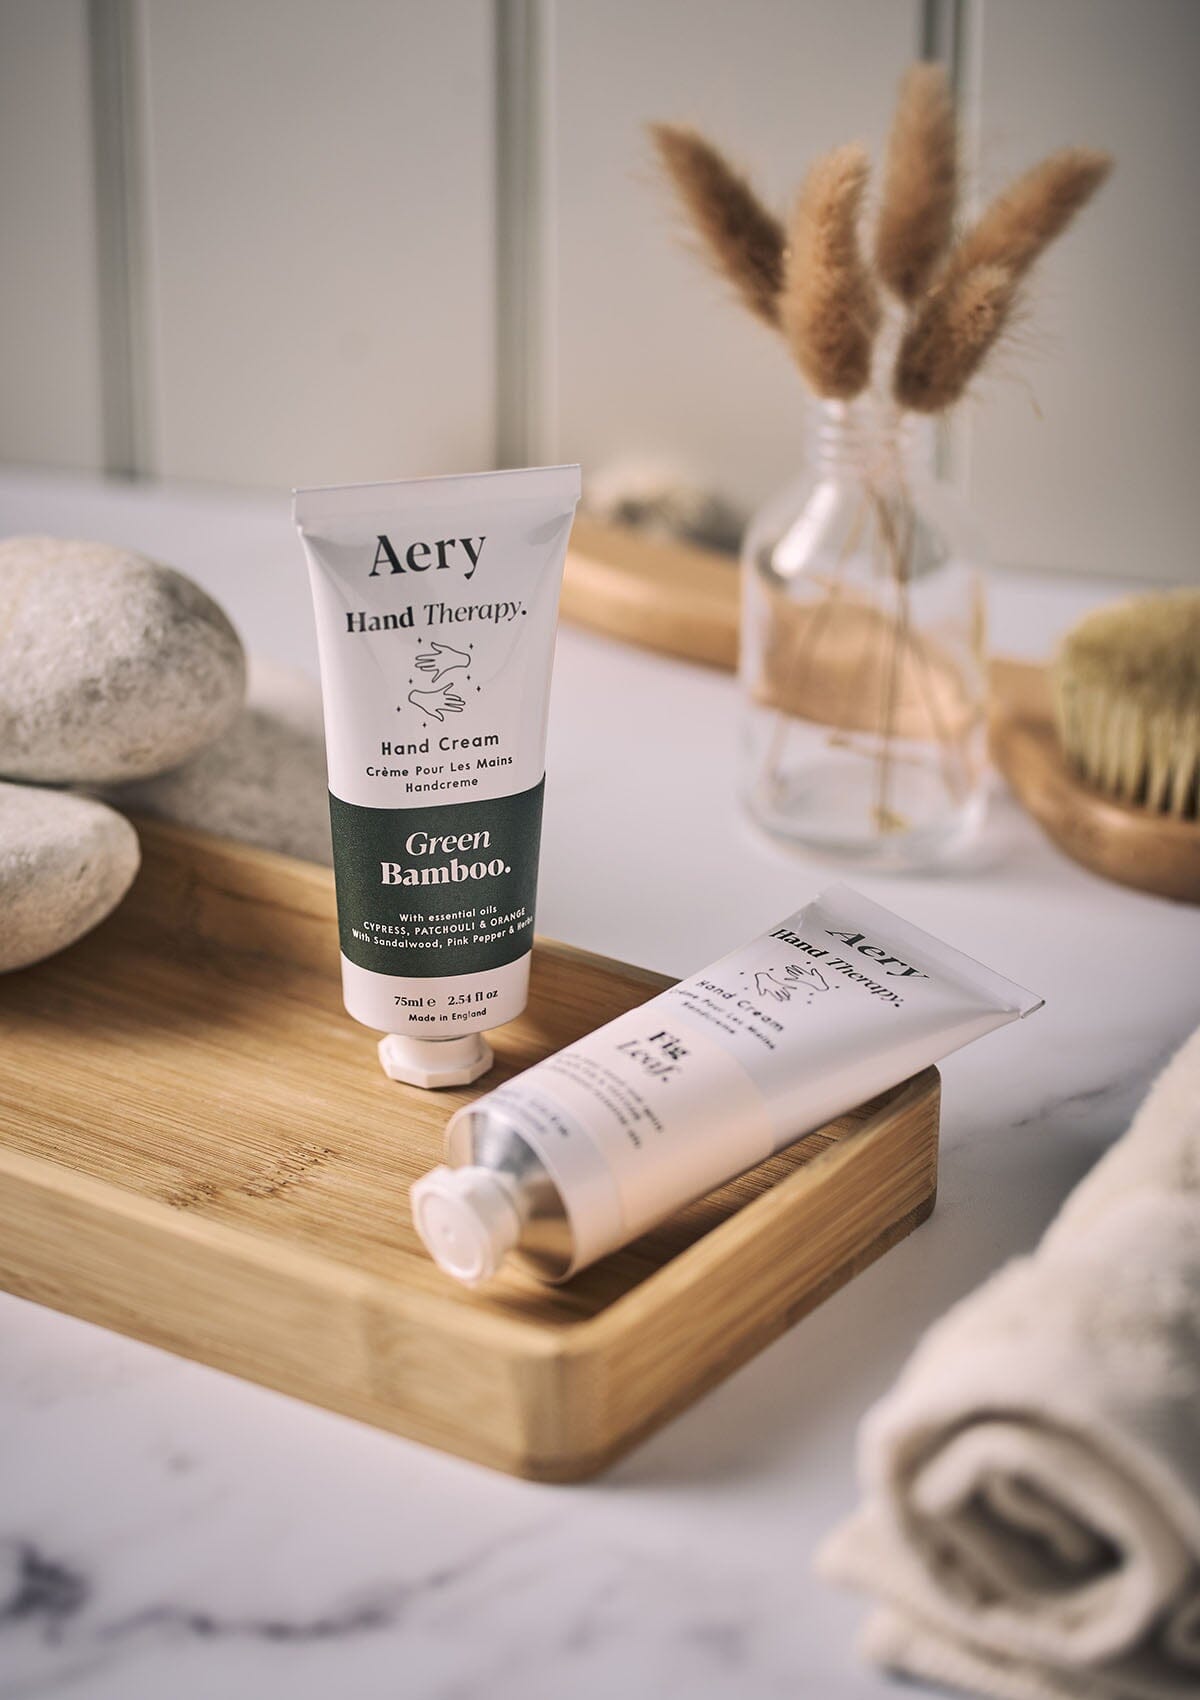 Green Bamboo hand cream by Aery displayed next to Fig leaf hand cream on wooden tray in bathroom 